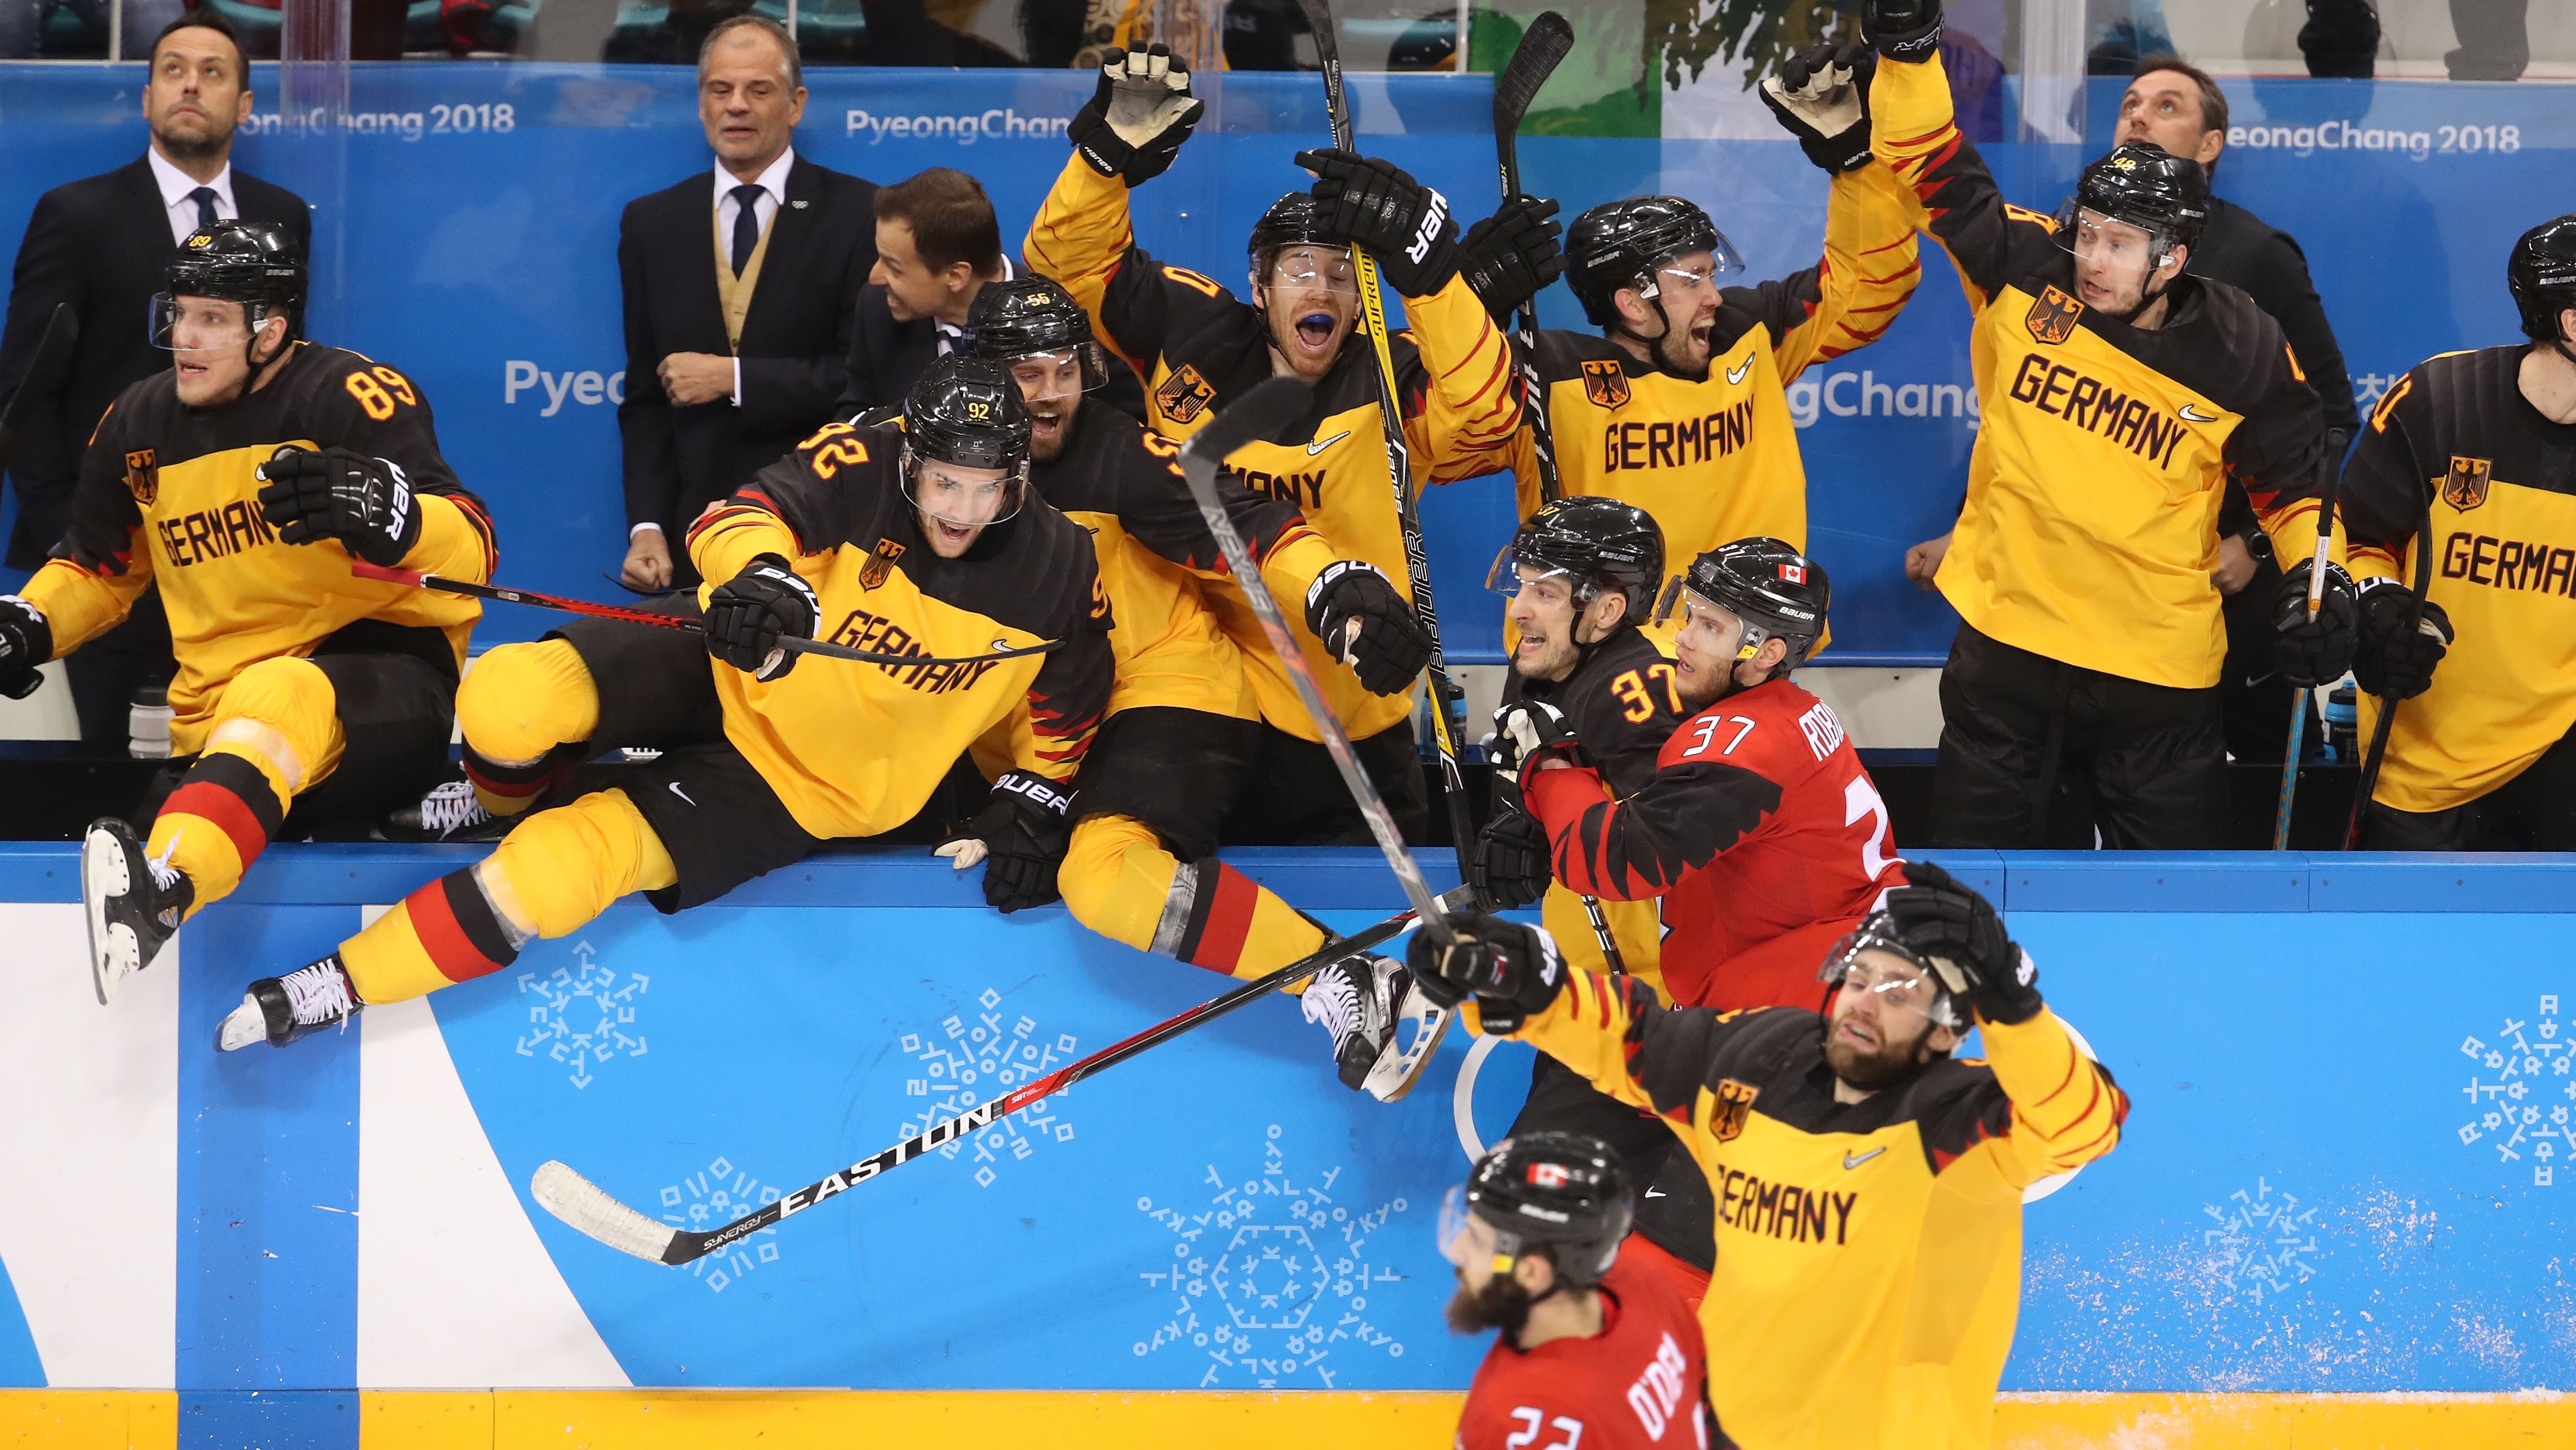 Germany celebrate defeating Canada 4-3 in the semifinals 